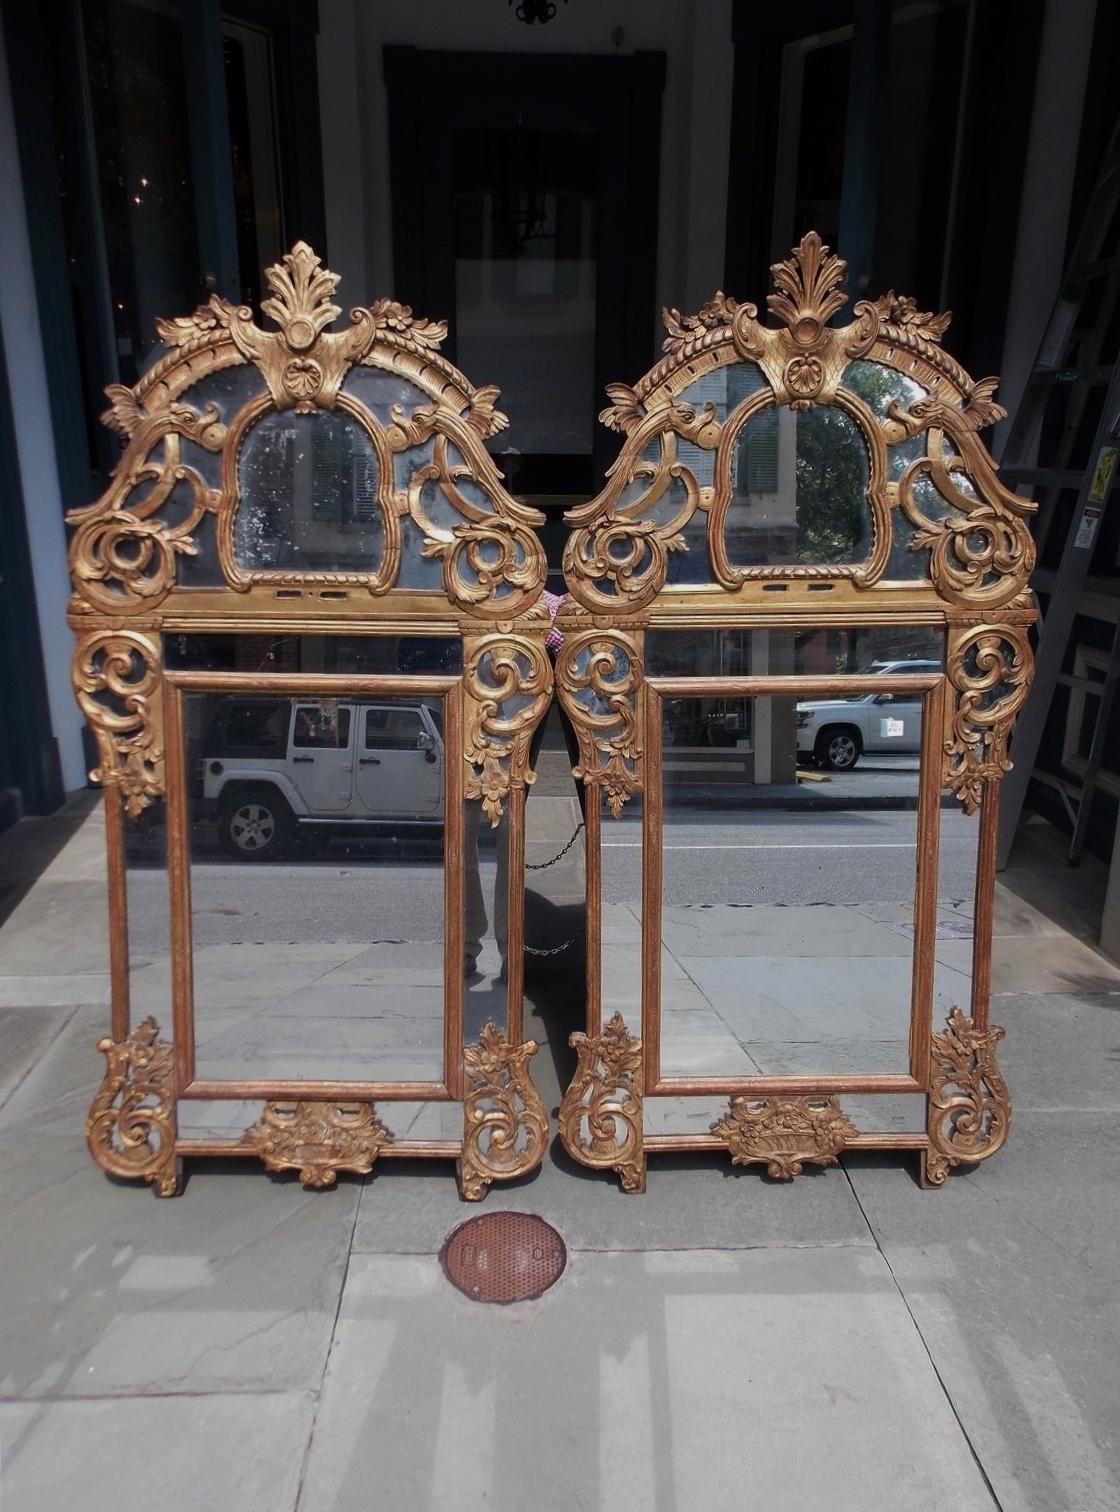 Pair of Italian neoclassical gilt carved wood mirrors with broken arch crest, upper centered foliage fan, molded edge gadrooning, flanking stylized dragon heads, floral scrolled sides, and resting on a lower centered flower basket, Early 19th